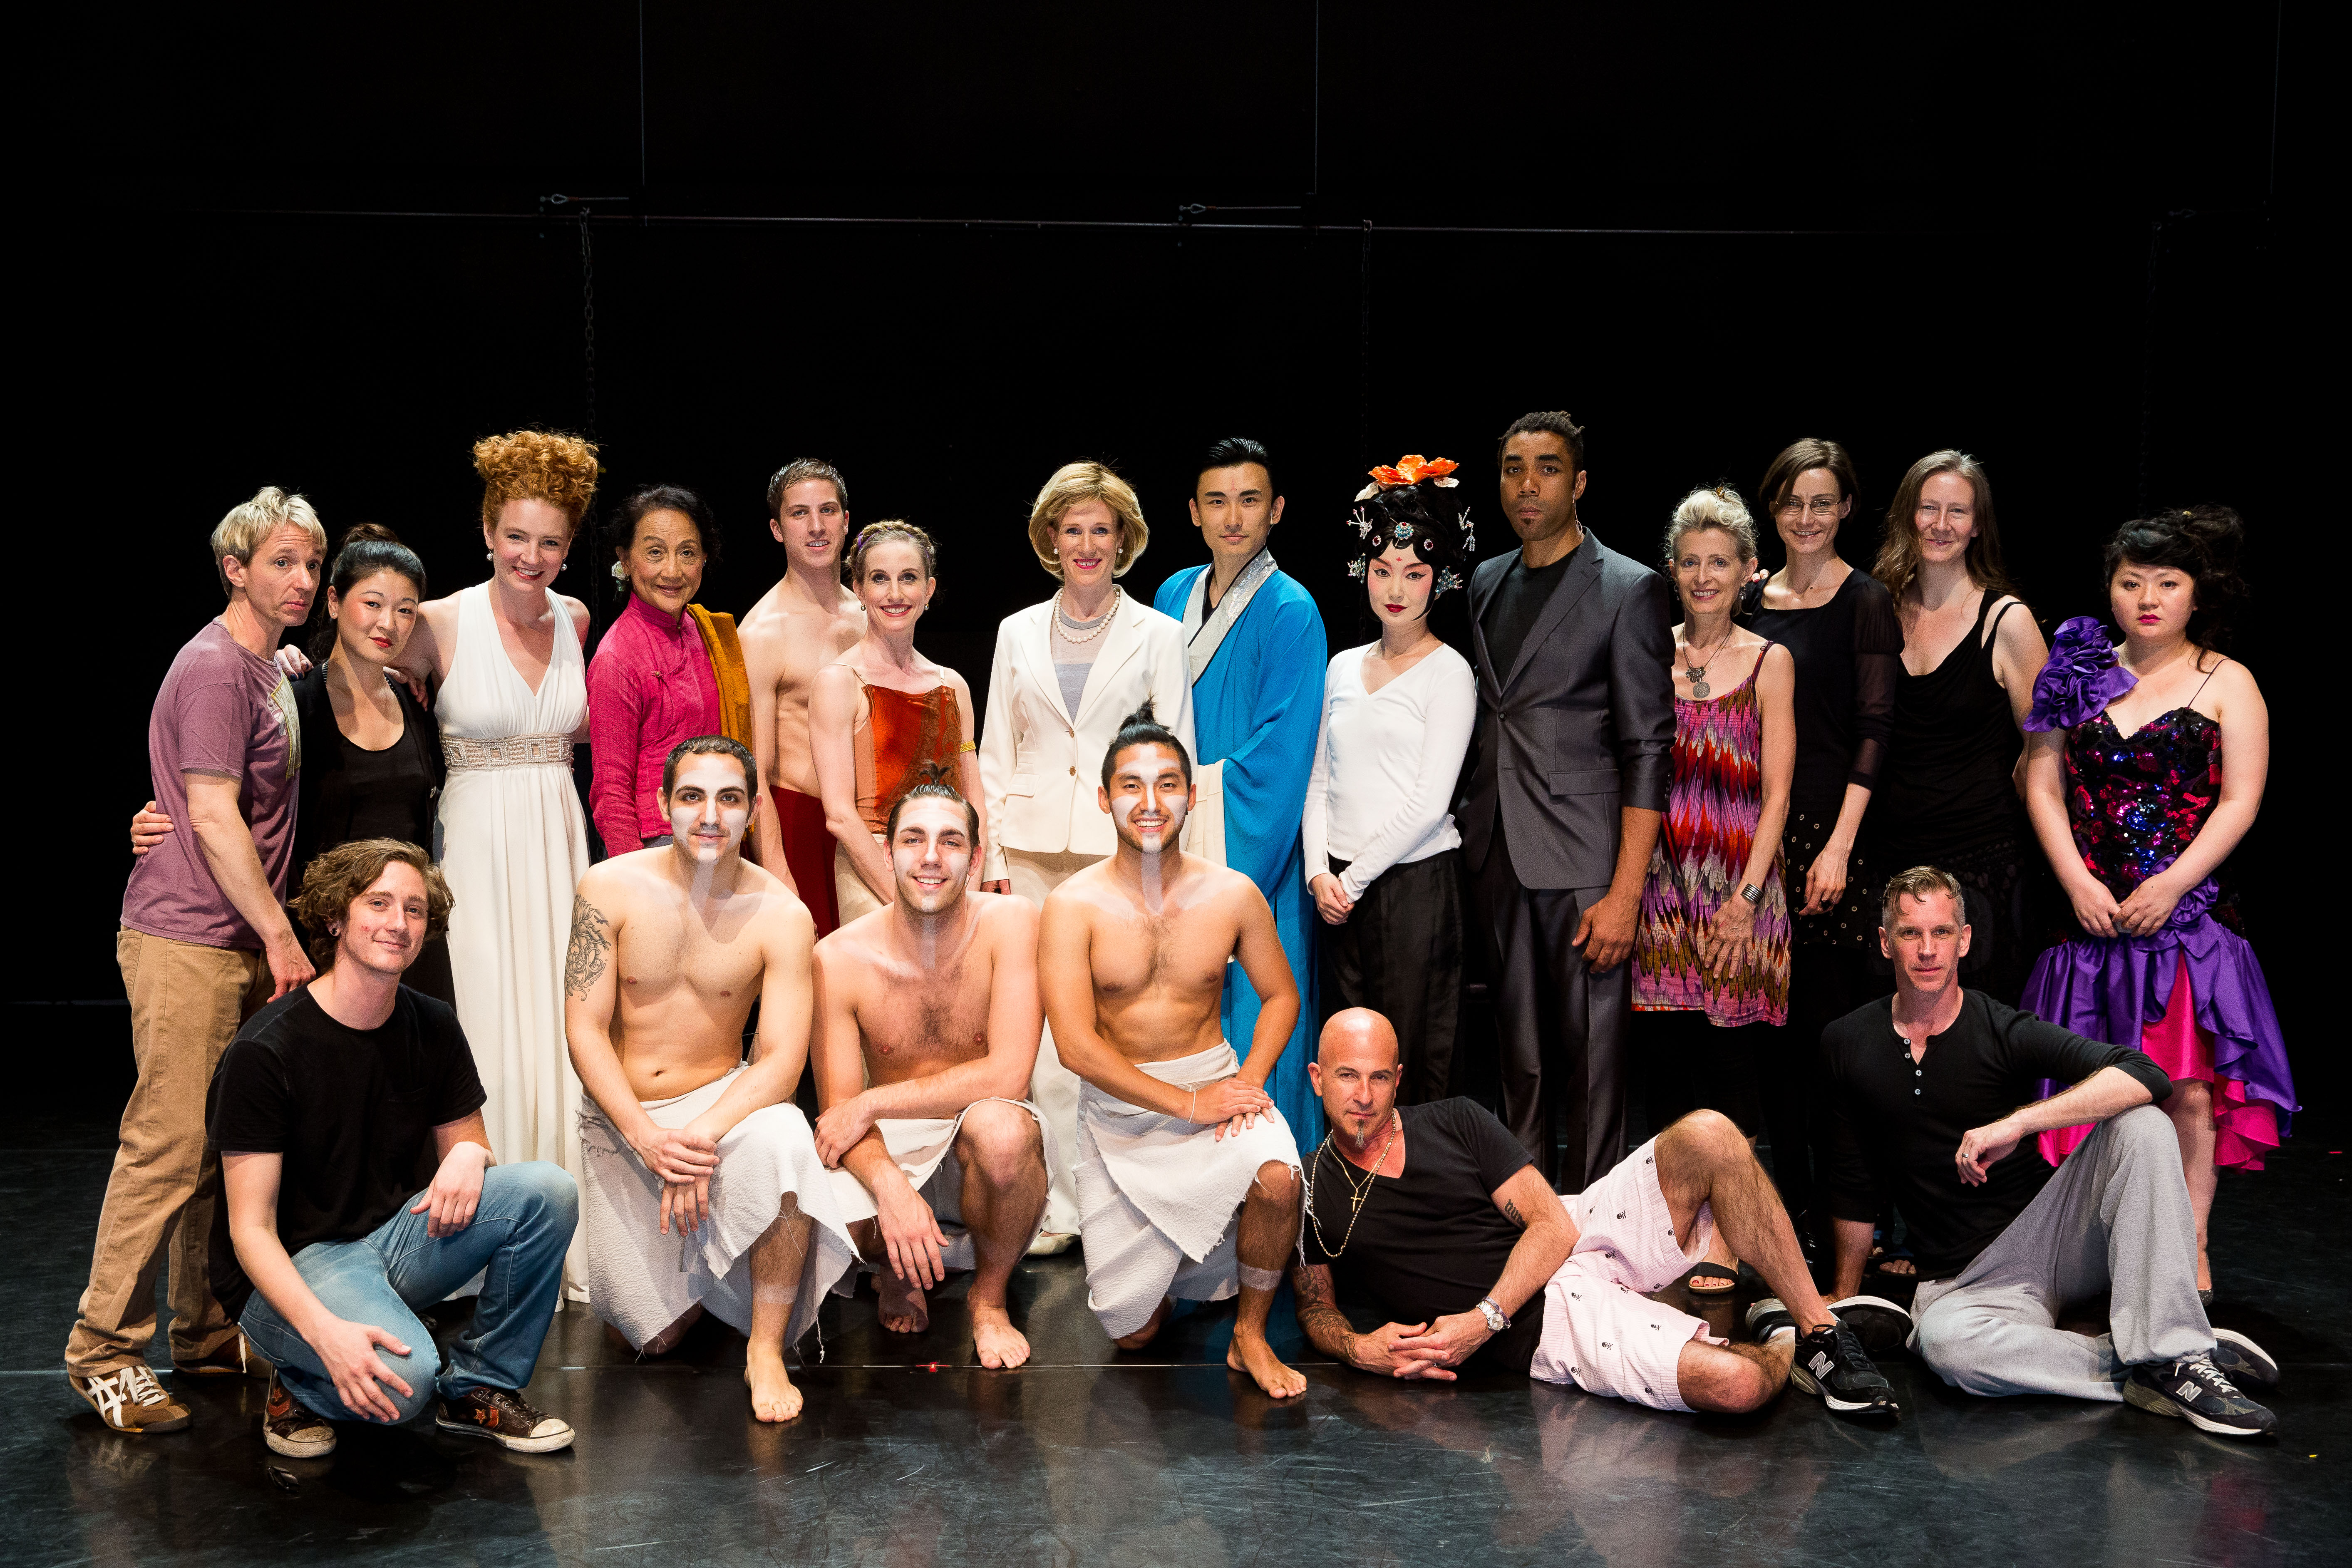 The entire crew/cast of Women: The War Within a dance-theatre-opera